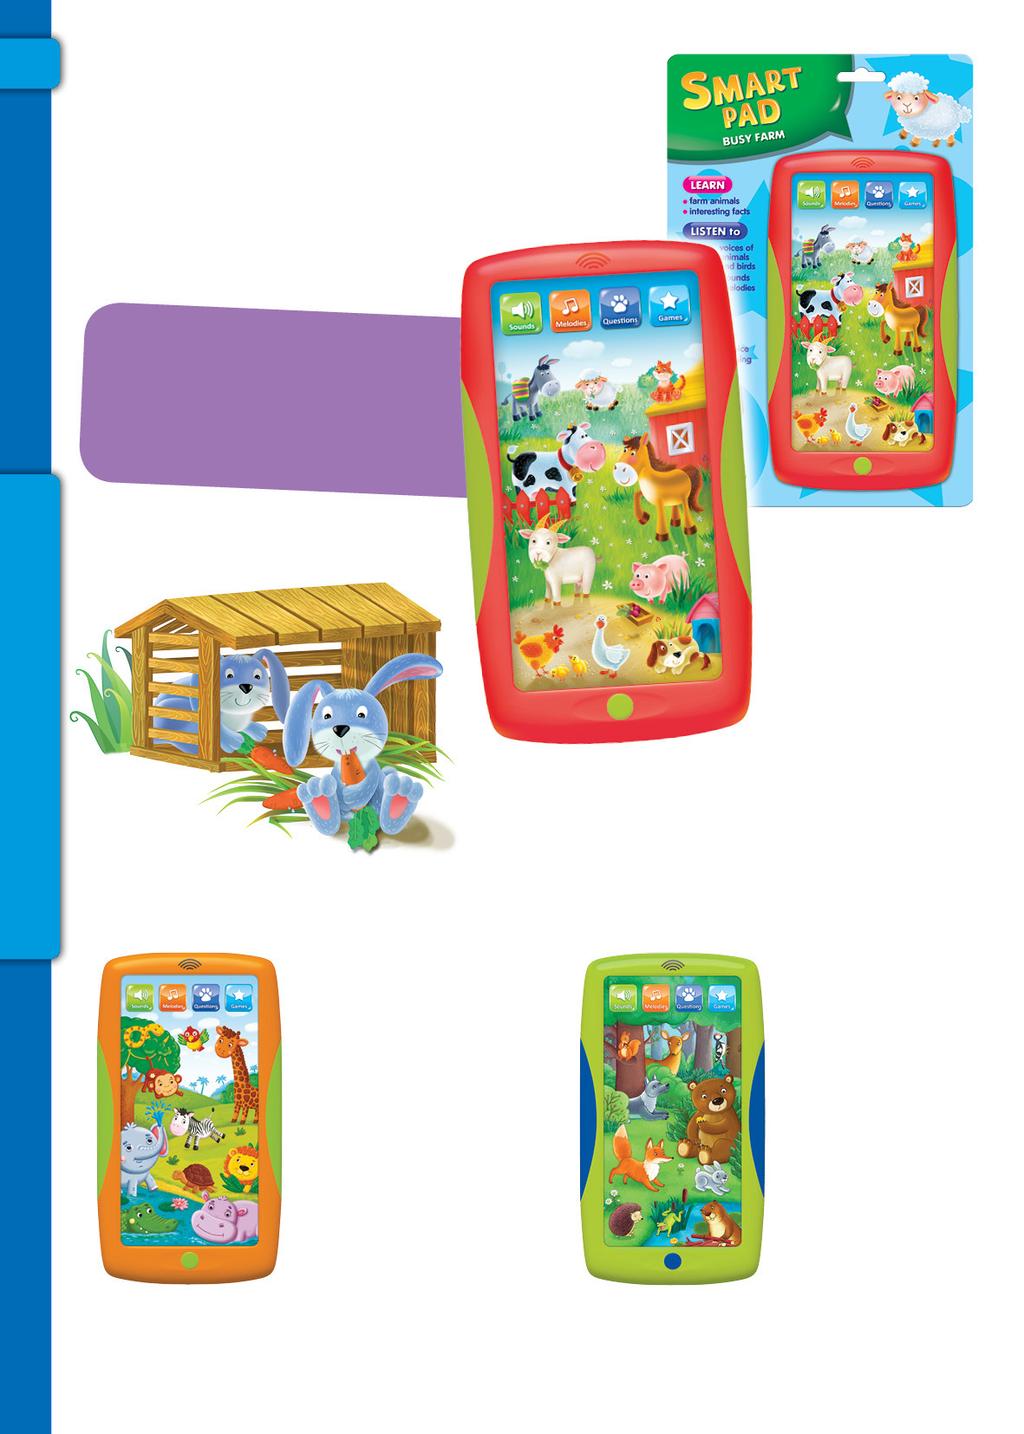 4 BUSY FARM REF. AZT-01-A-004 Real animal voices Funny sounds and amusing melodies 4 modes: sounds, melodies, games and questions The splendid Busy Farm pad will help your child to meet ani mals.